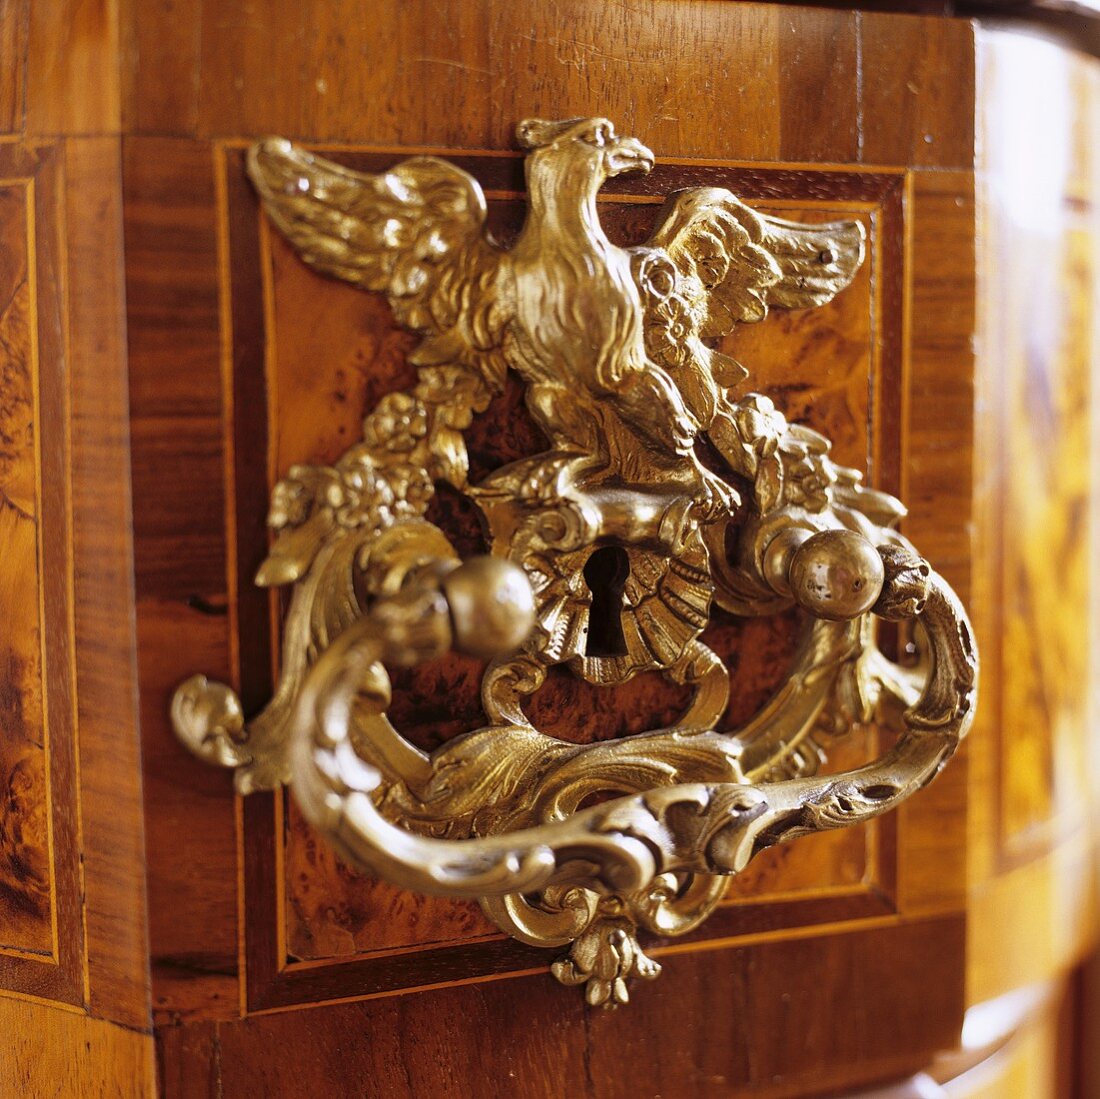 A handle and a lock on a piece of furniture with an animal figure